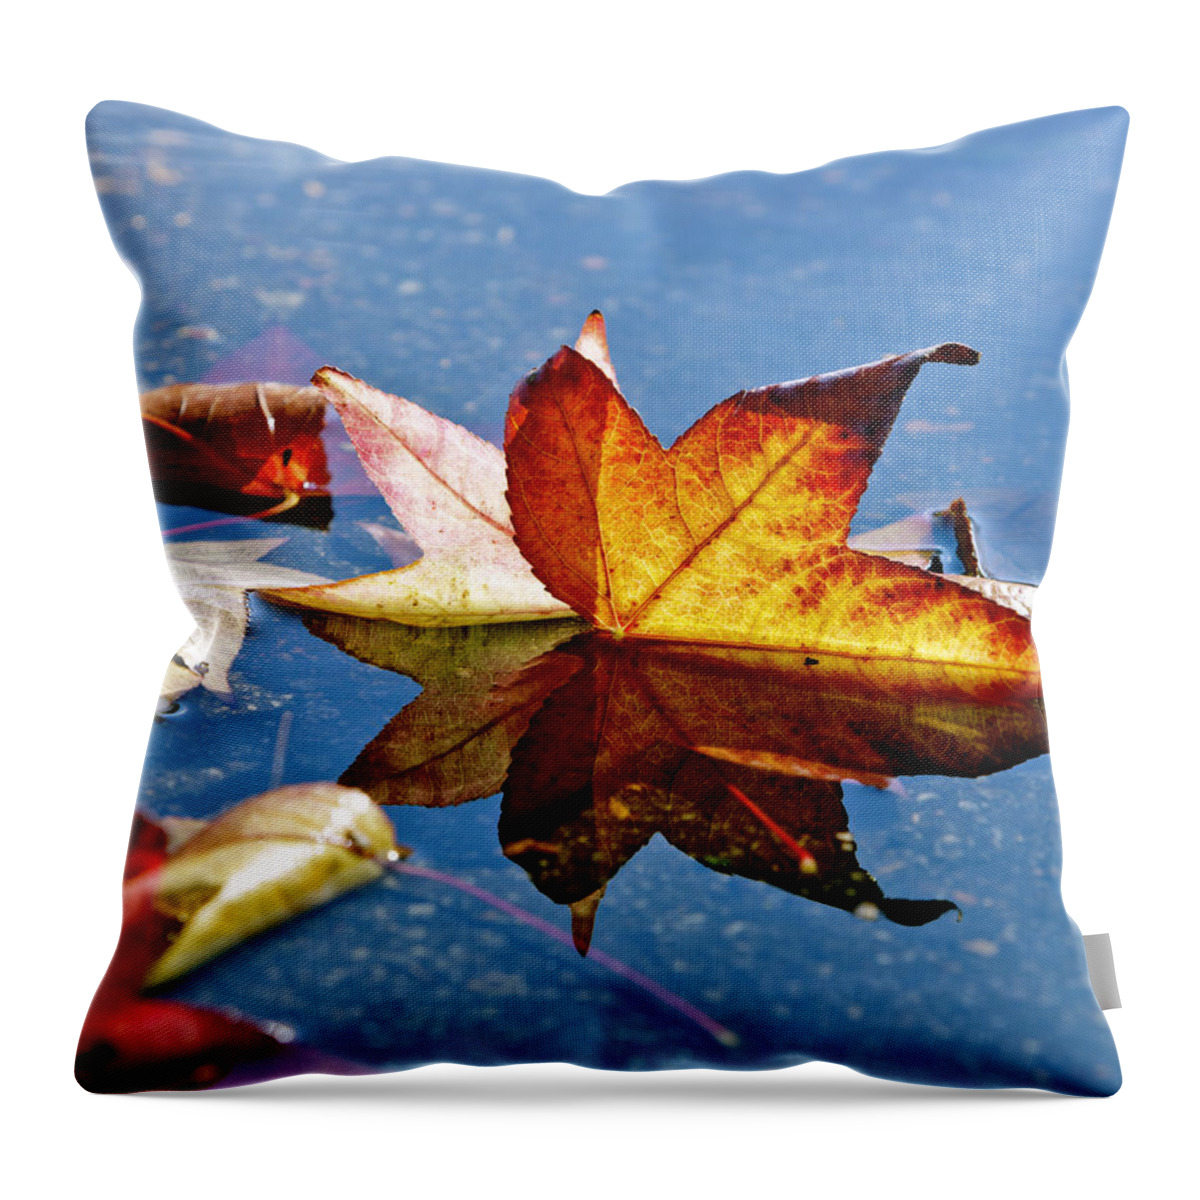 Autumn Leaves Throw Pillow featuring the photograph Autumn Leaves by Her Arts Desire